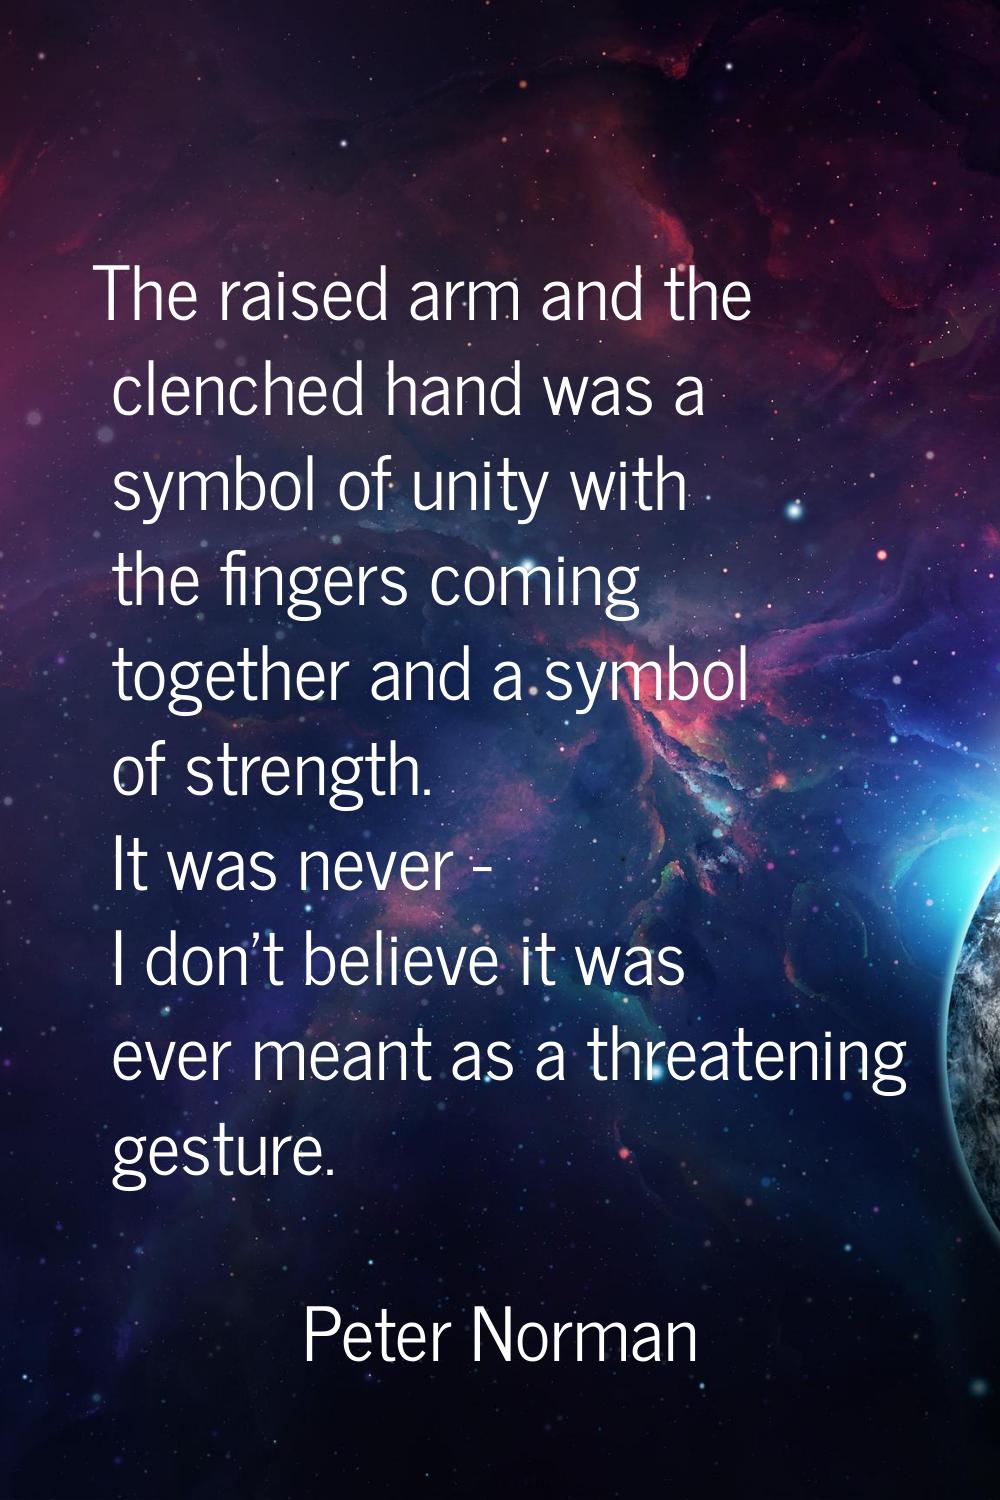 The raised arm and the clenched hand was a symbol of unity with the fingers coming together and a s